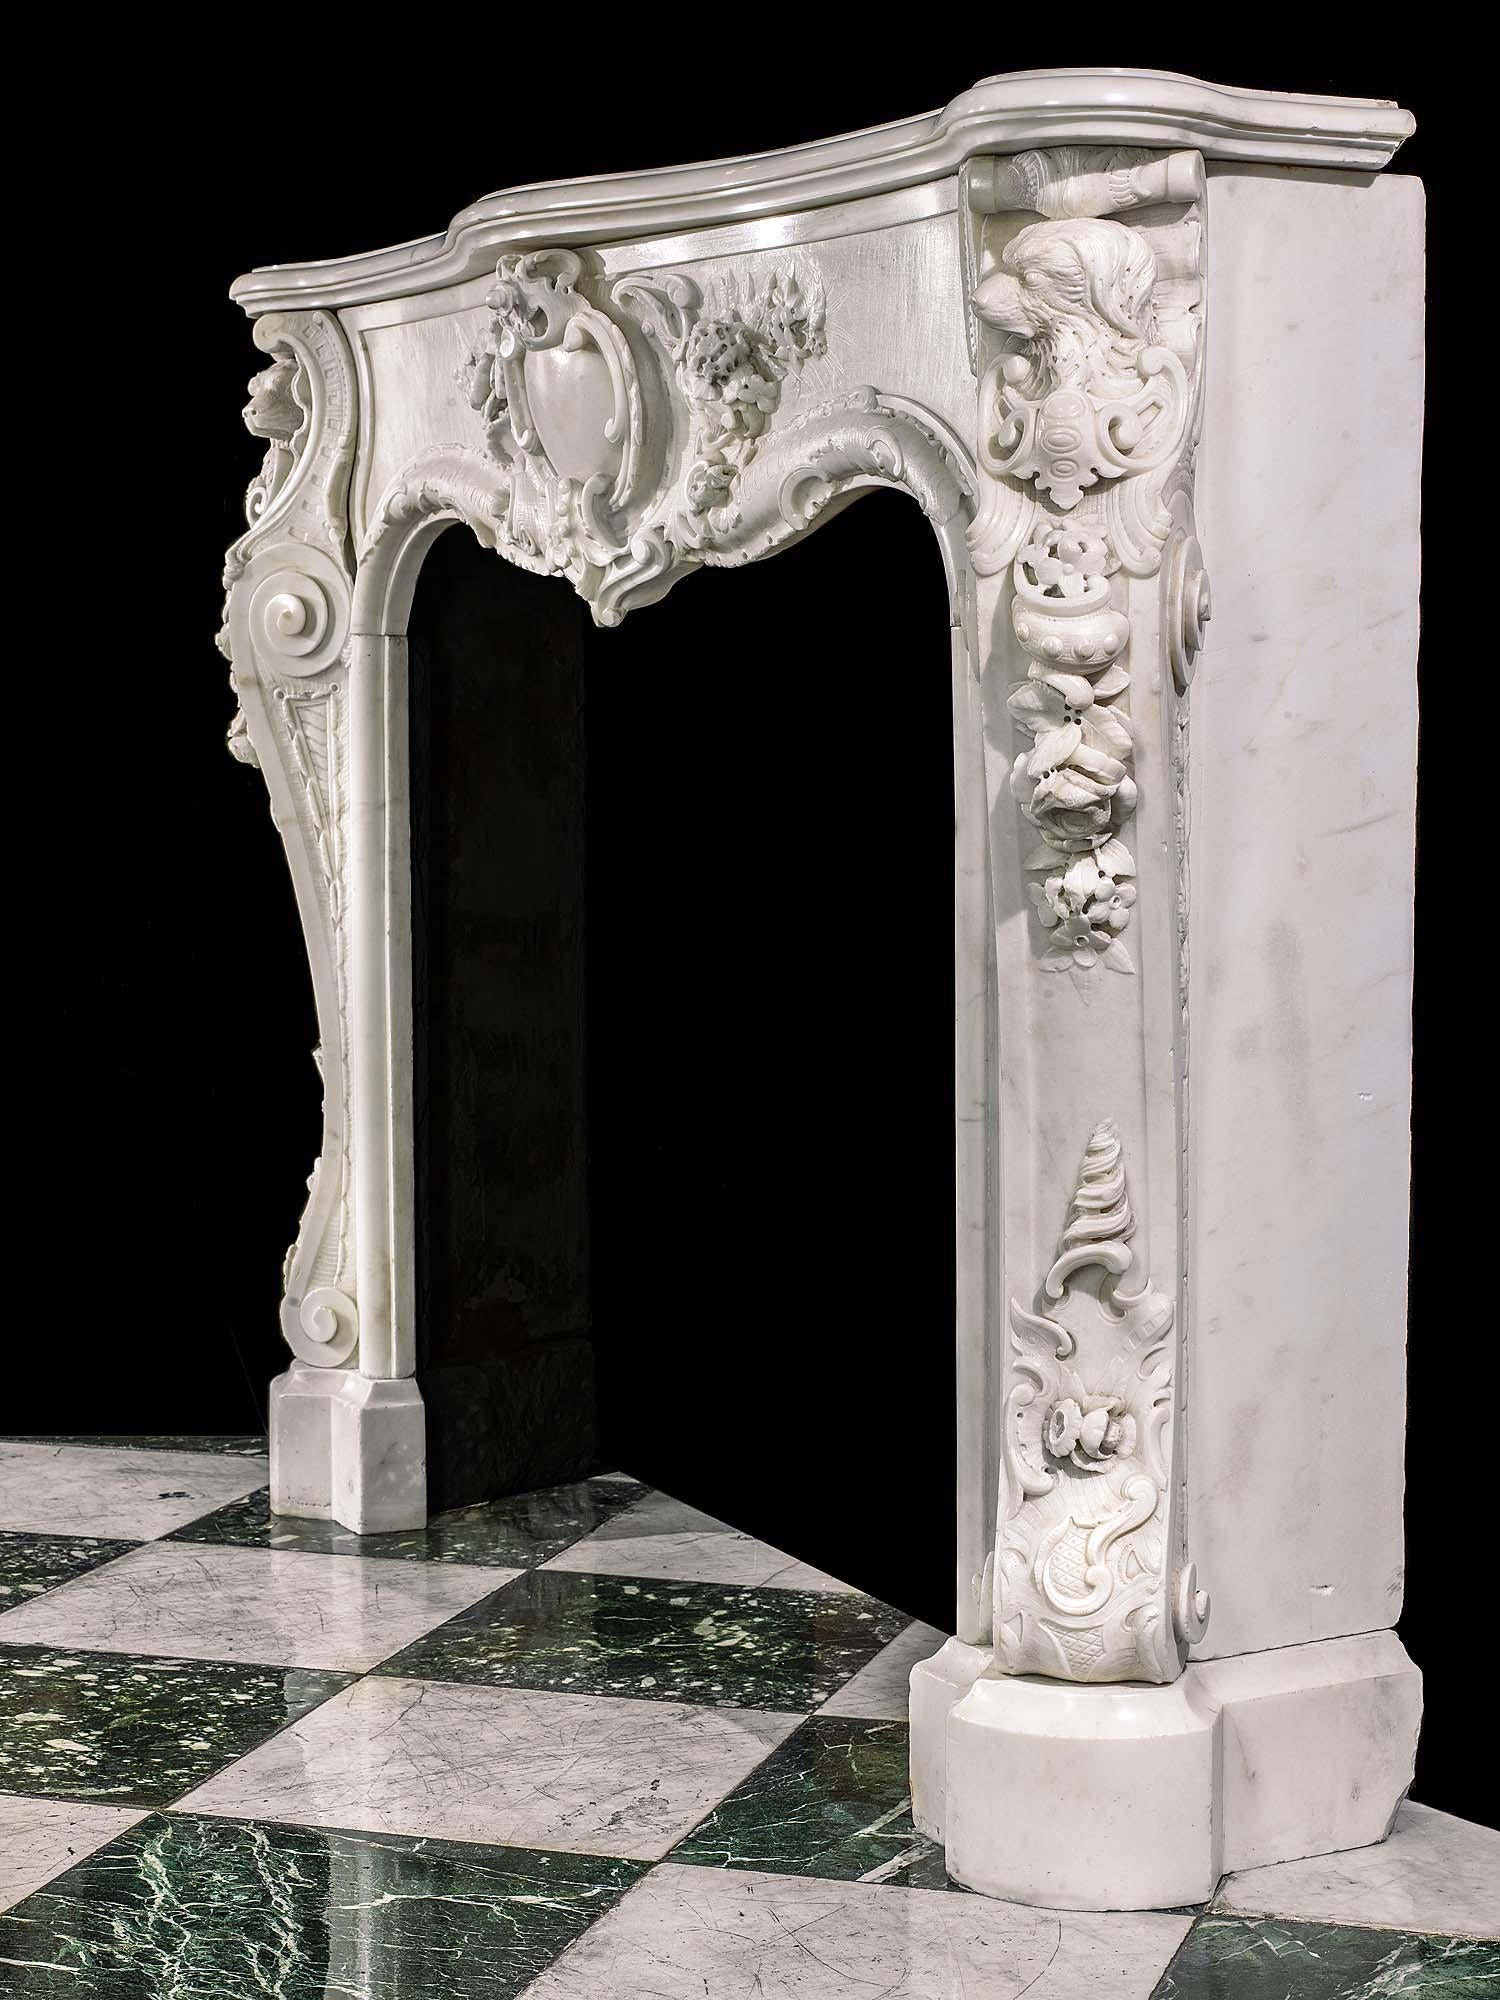 A rare and remarkable English Rococo Statuary marble antique chimneypiece with richly and intricately carved floral and rocaille decoration. The boldly conceived and executed central cartouche bordered by both subtle and high relief floral design